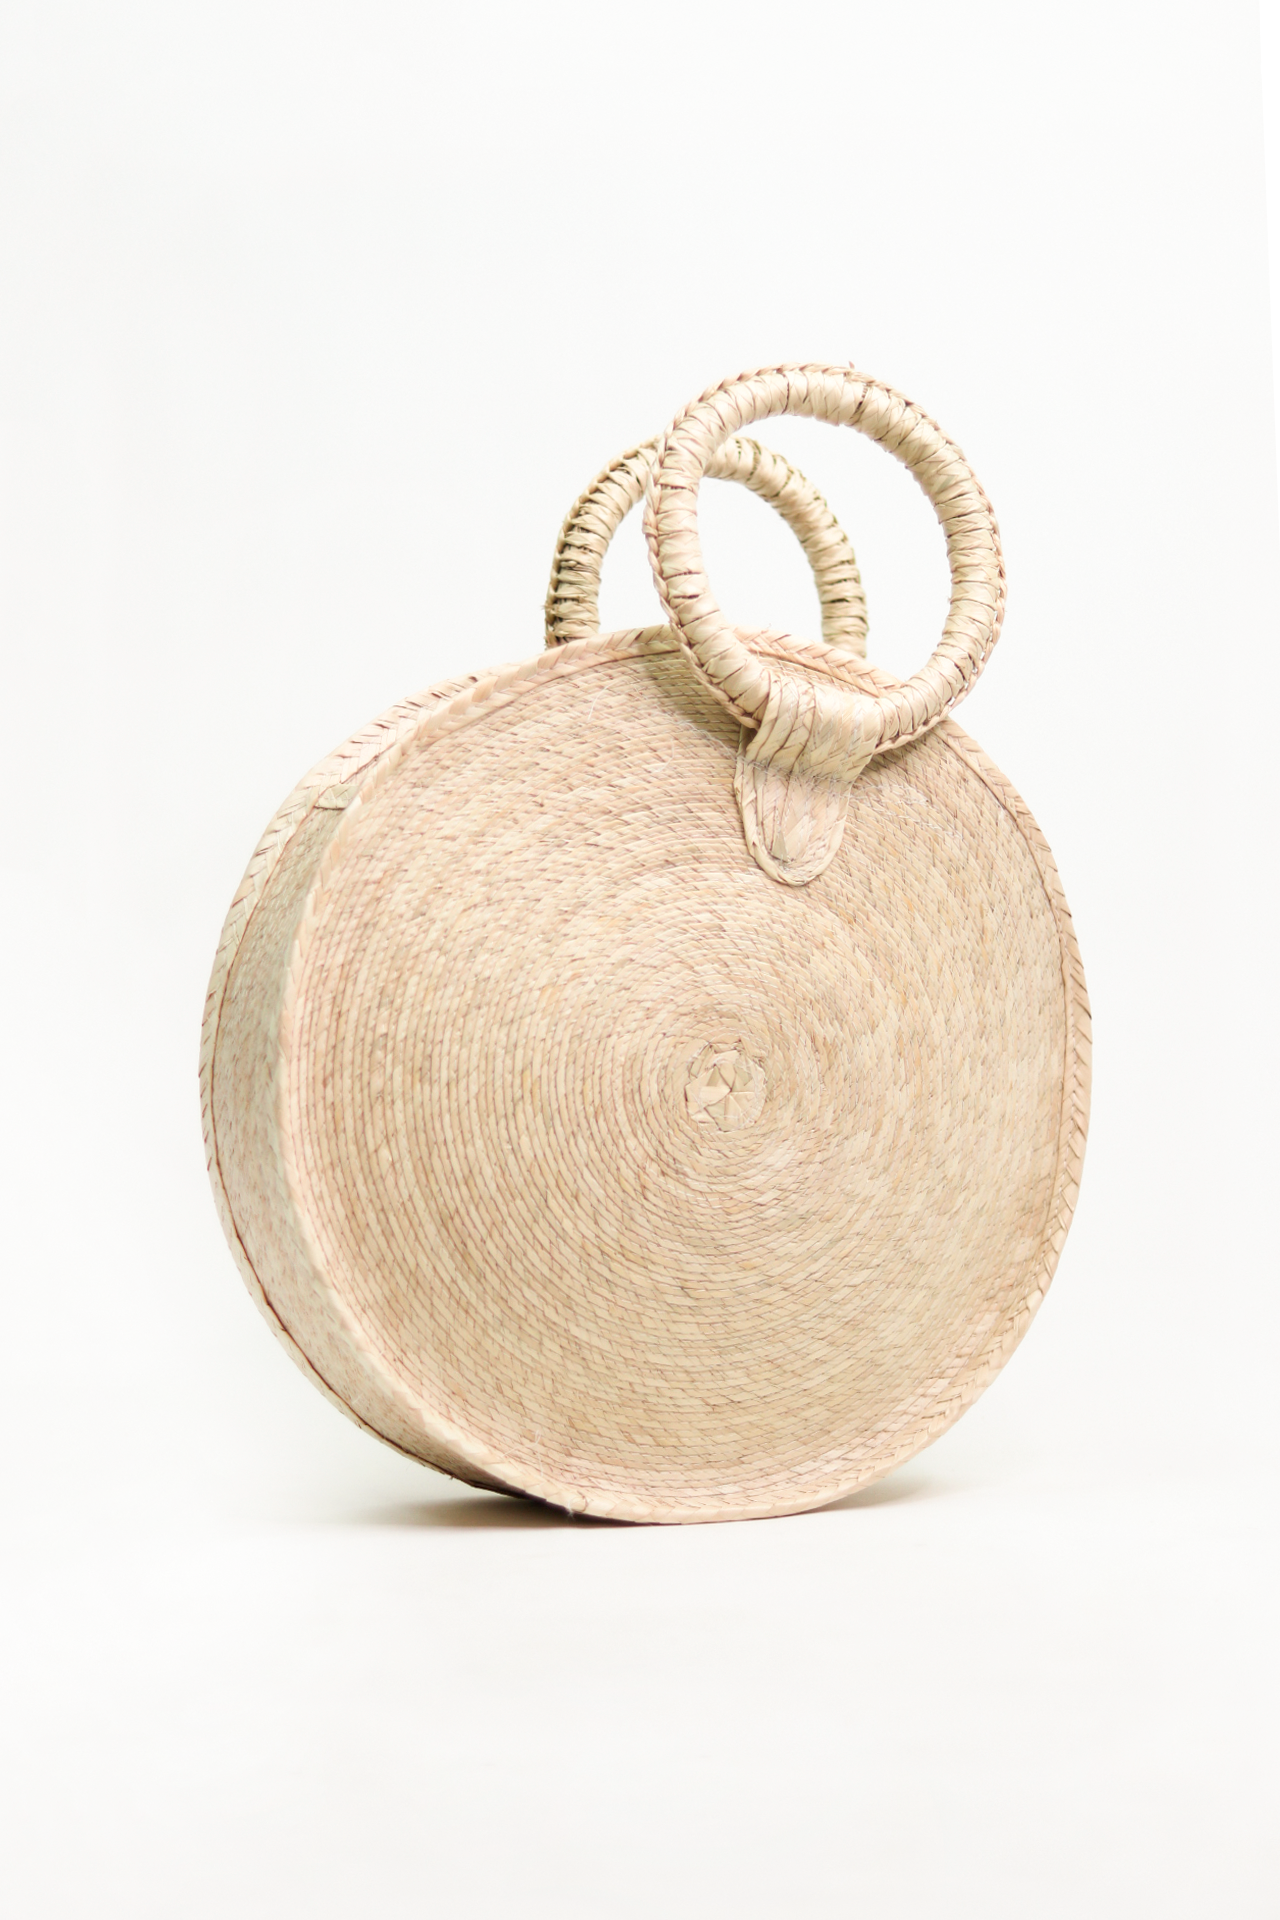 round woven handbag with a round handle to hold it, made from dried palm leaves.